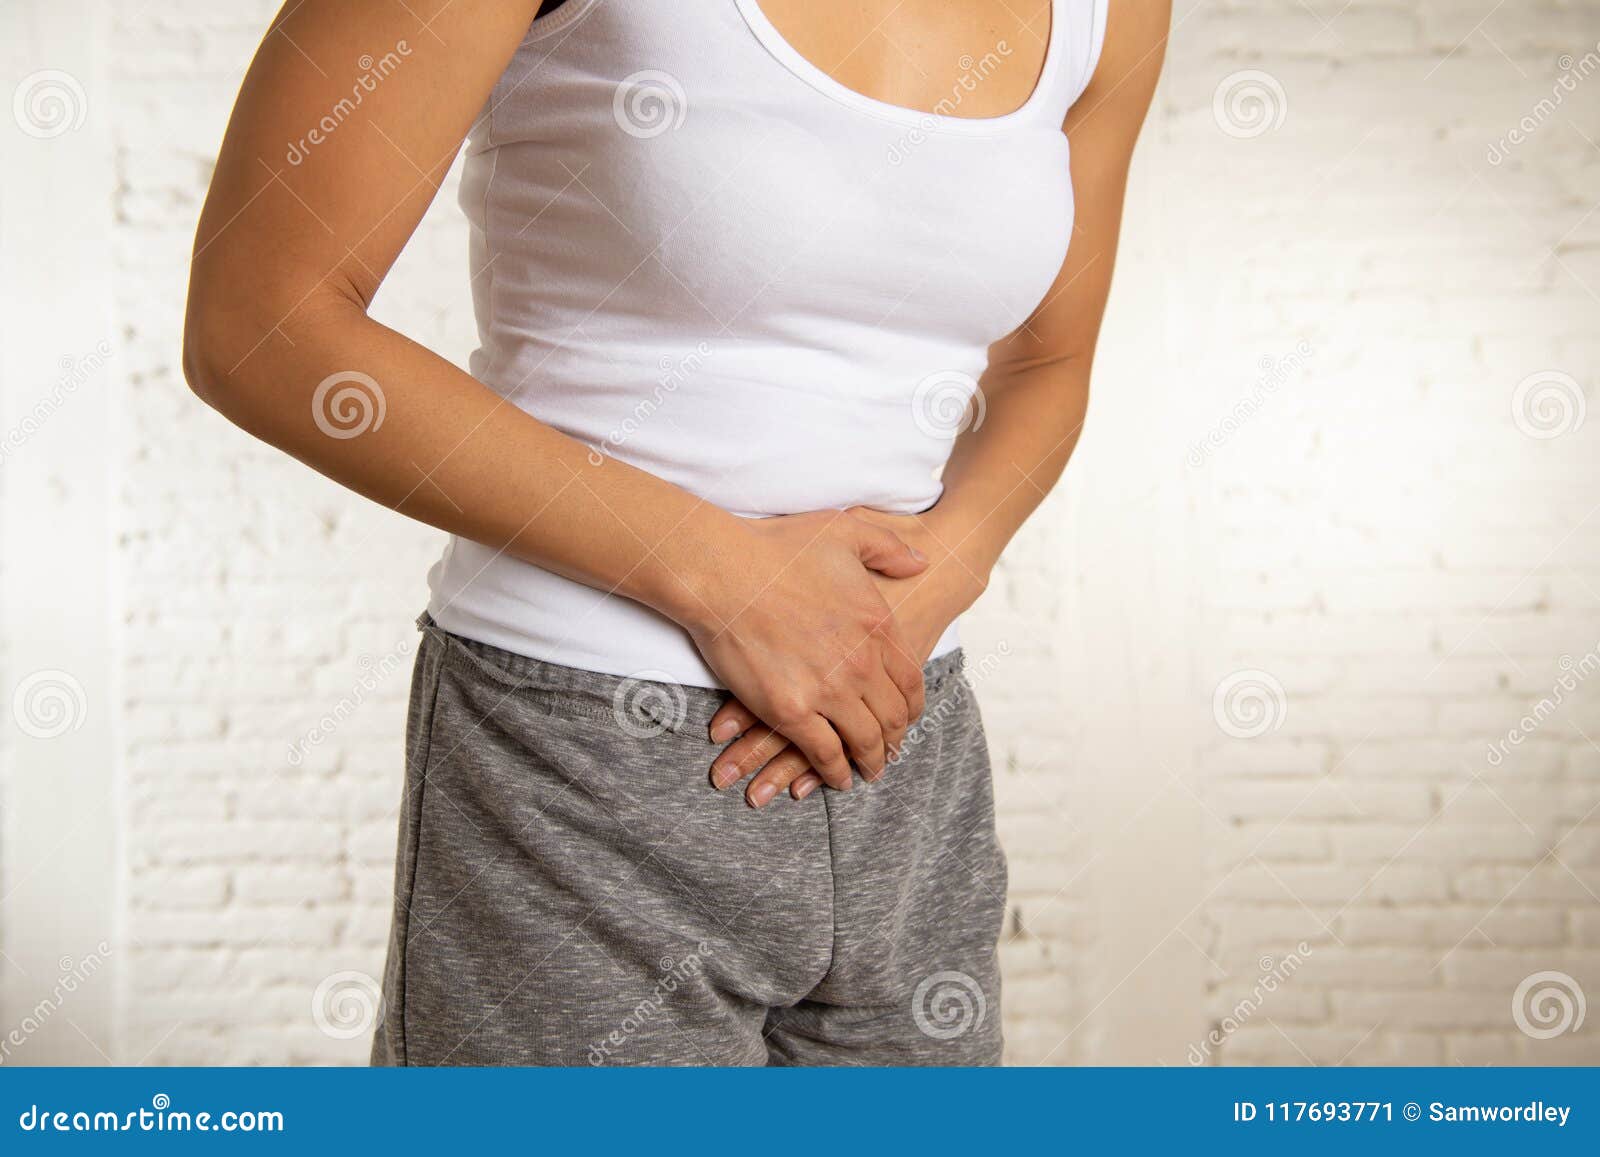 close up of beautiful woman body suffering from stomachache, period pain and menstrual cramps